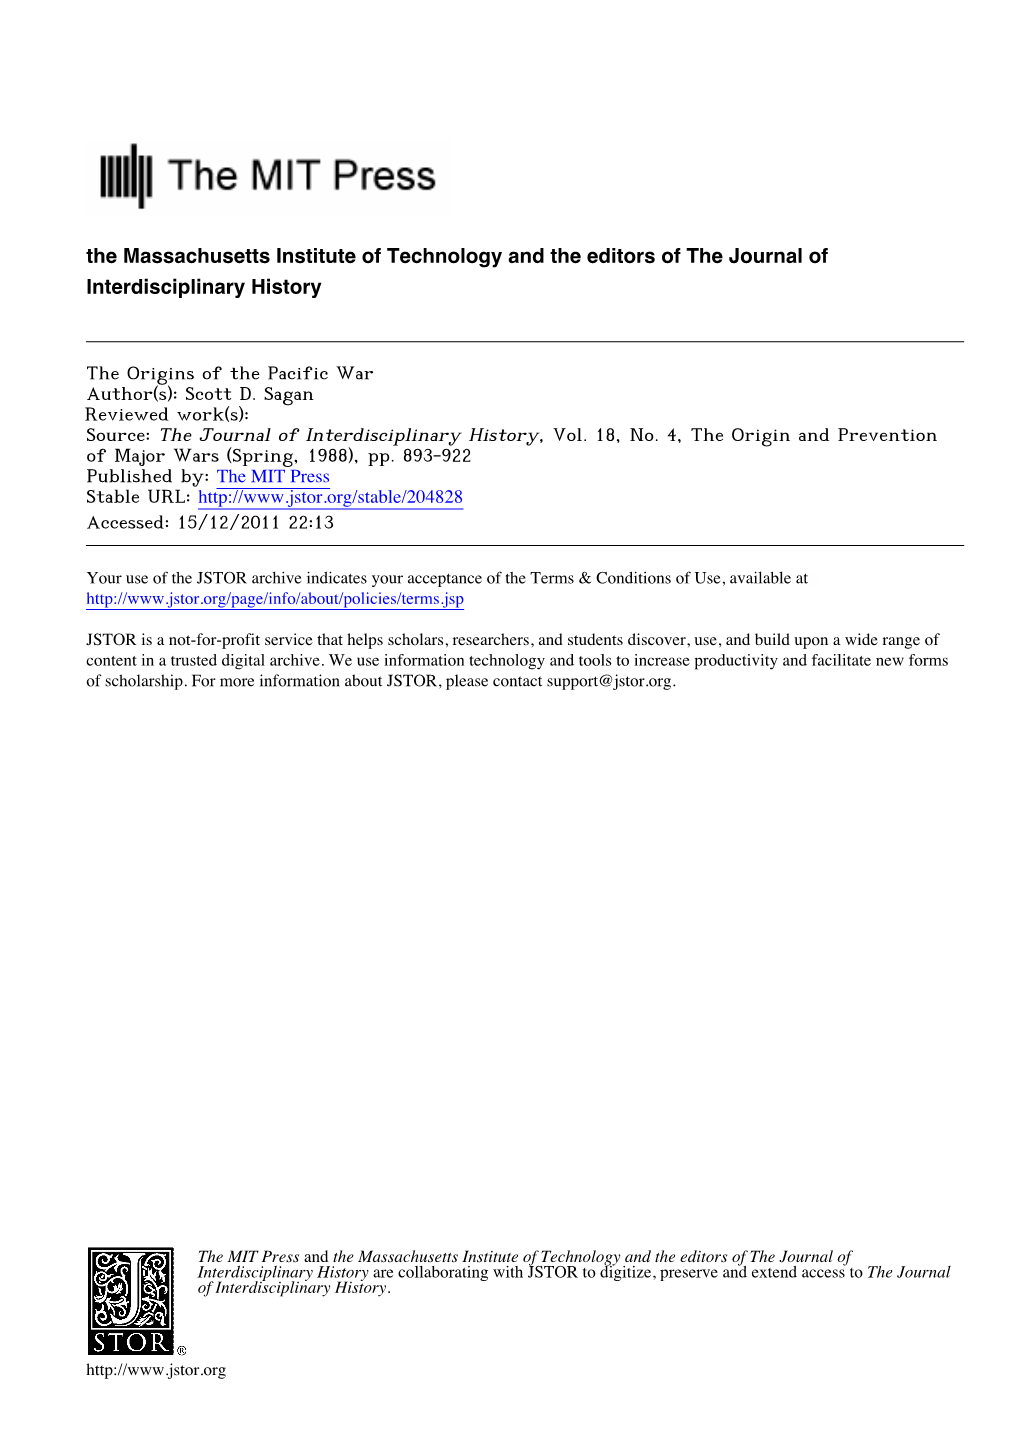 The Massachusetts Institute of Technology and the Editors of the Journal of Interdisciplinary History